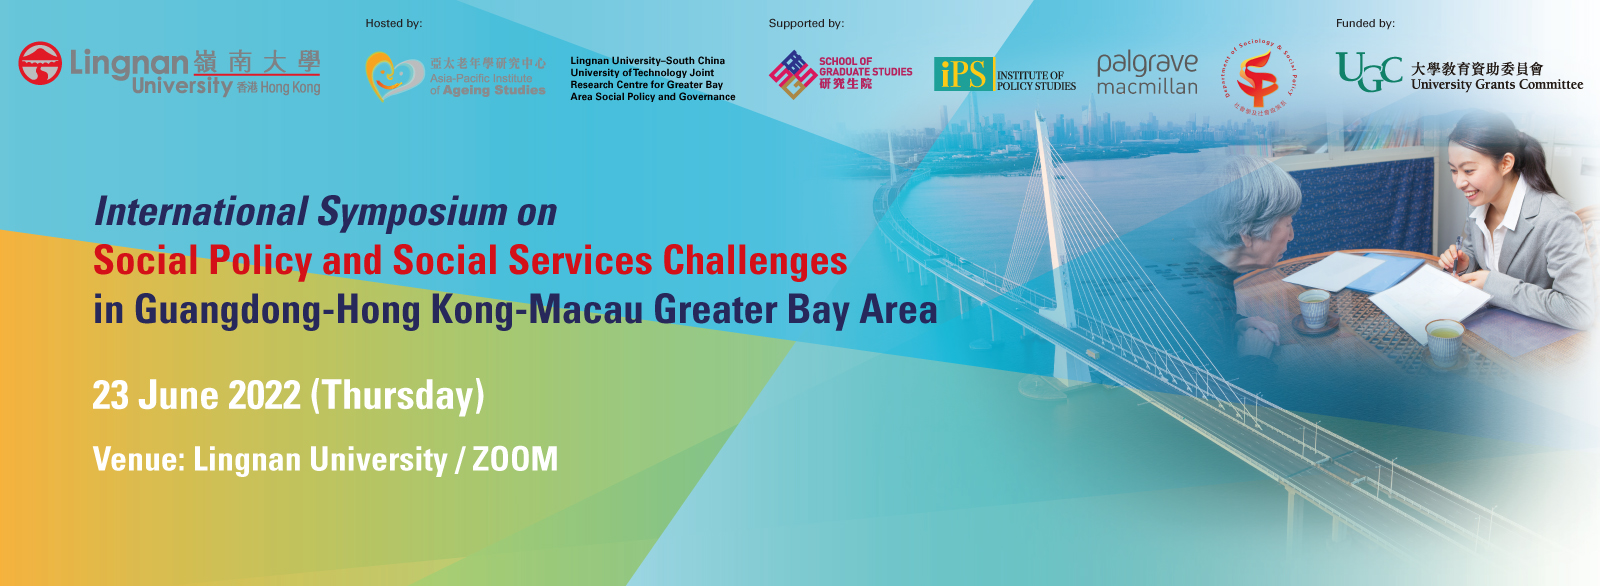 International Symposium on Social Policy and Social Services Challenges in the Greater Bay Area